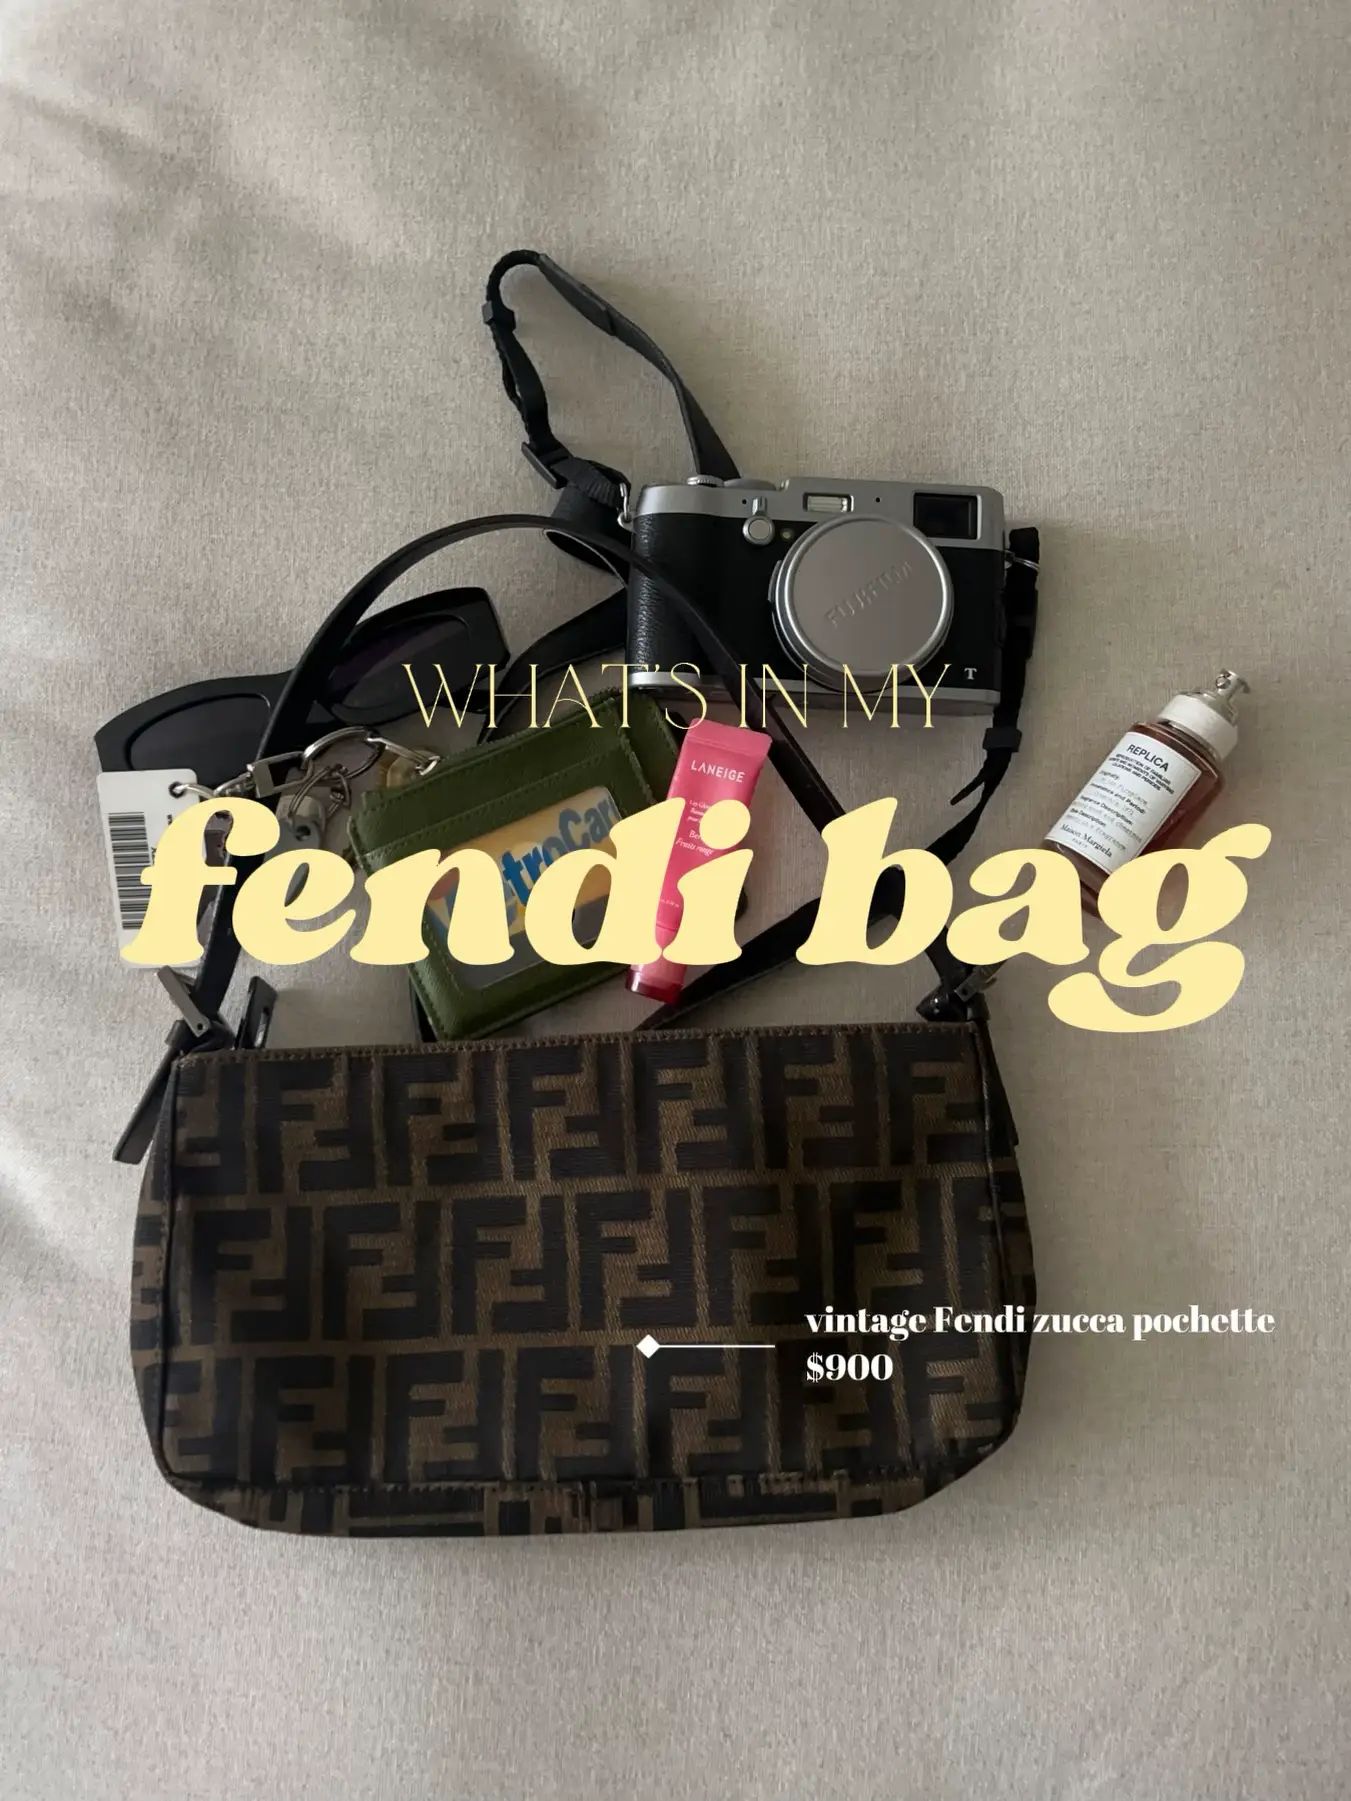 I Just Can't Stop Dreaming About This Little Vintage Fendi Bag - PurseBlog